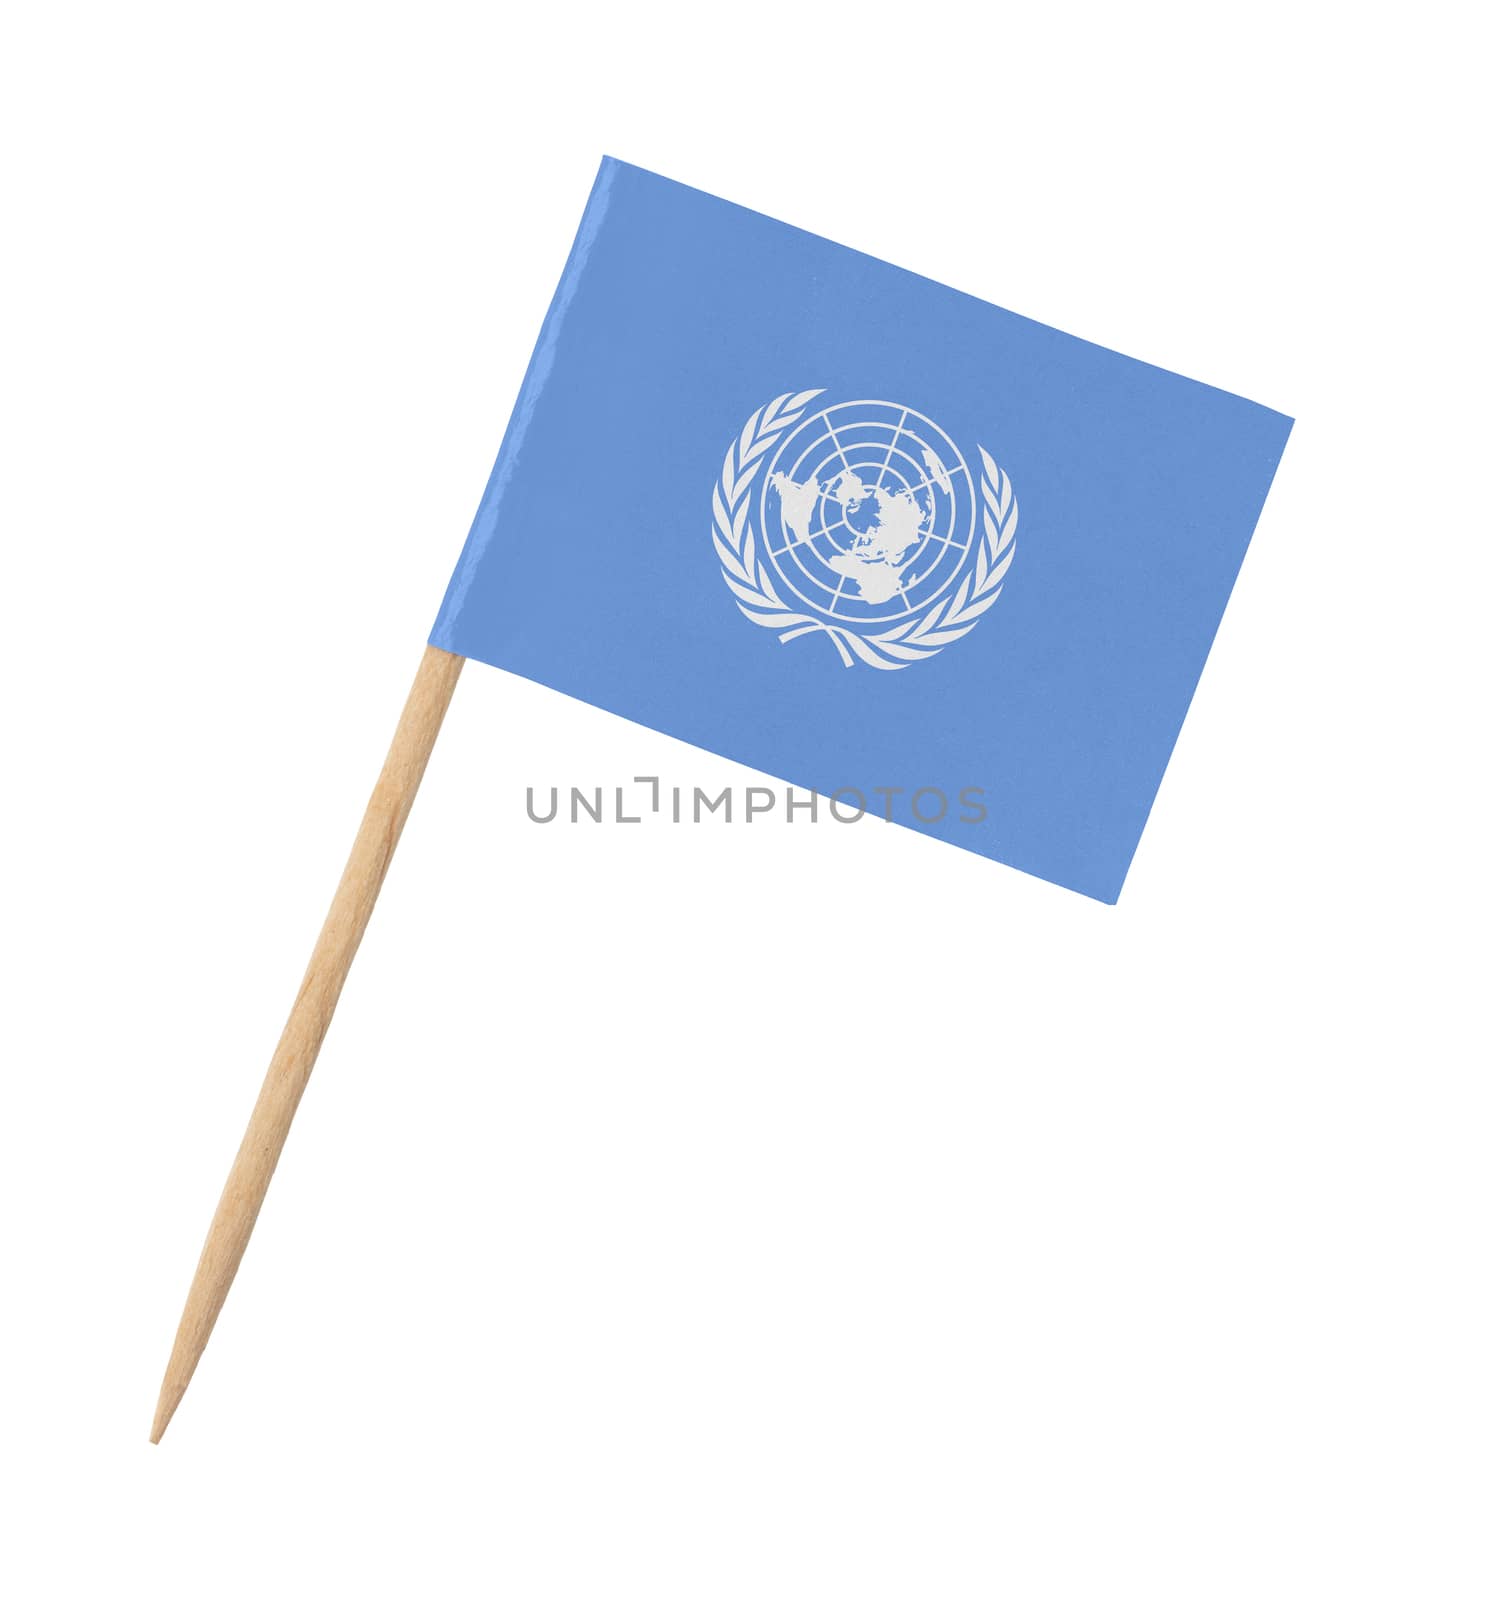 Small paper UN flag on wooden stick by michaklootwijk